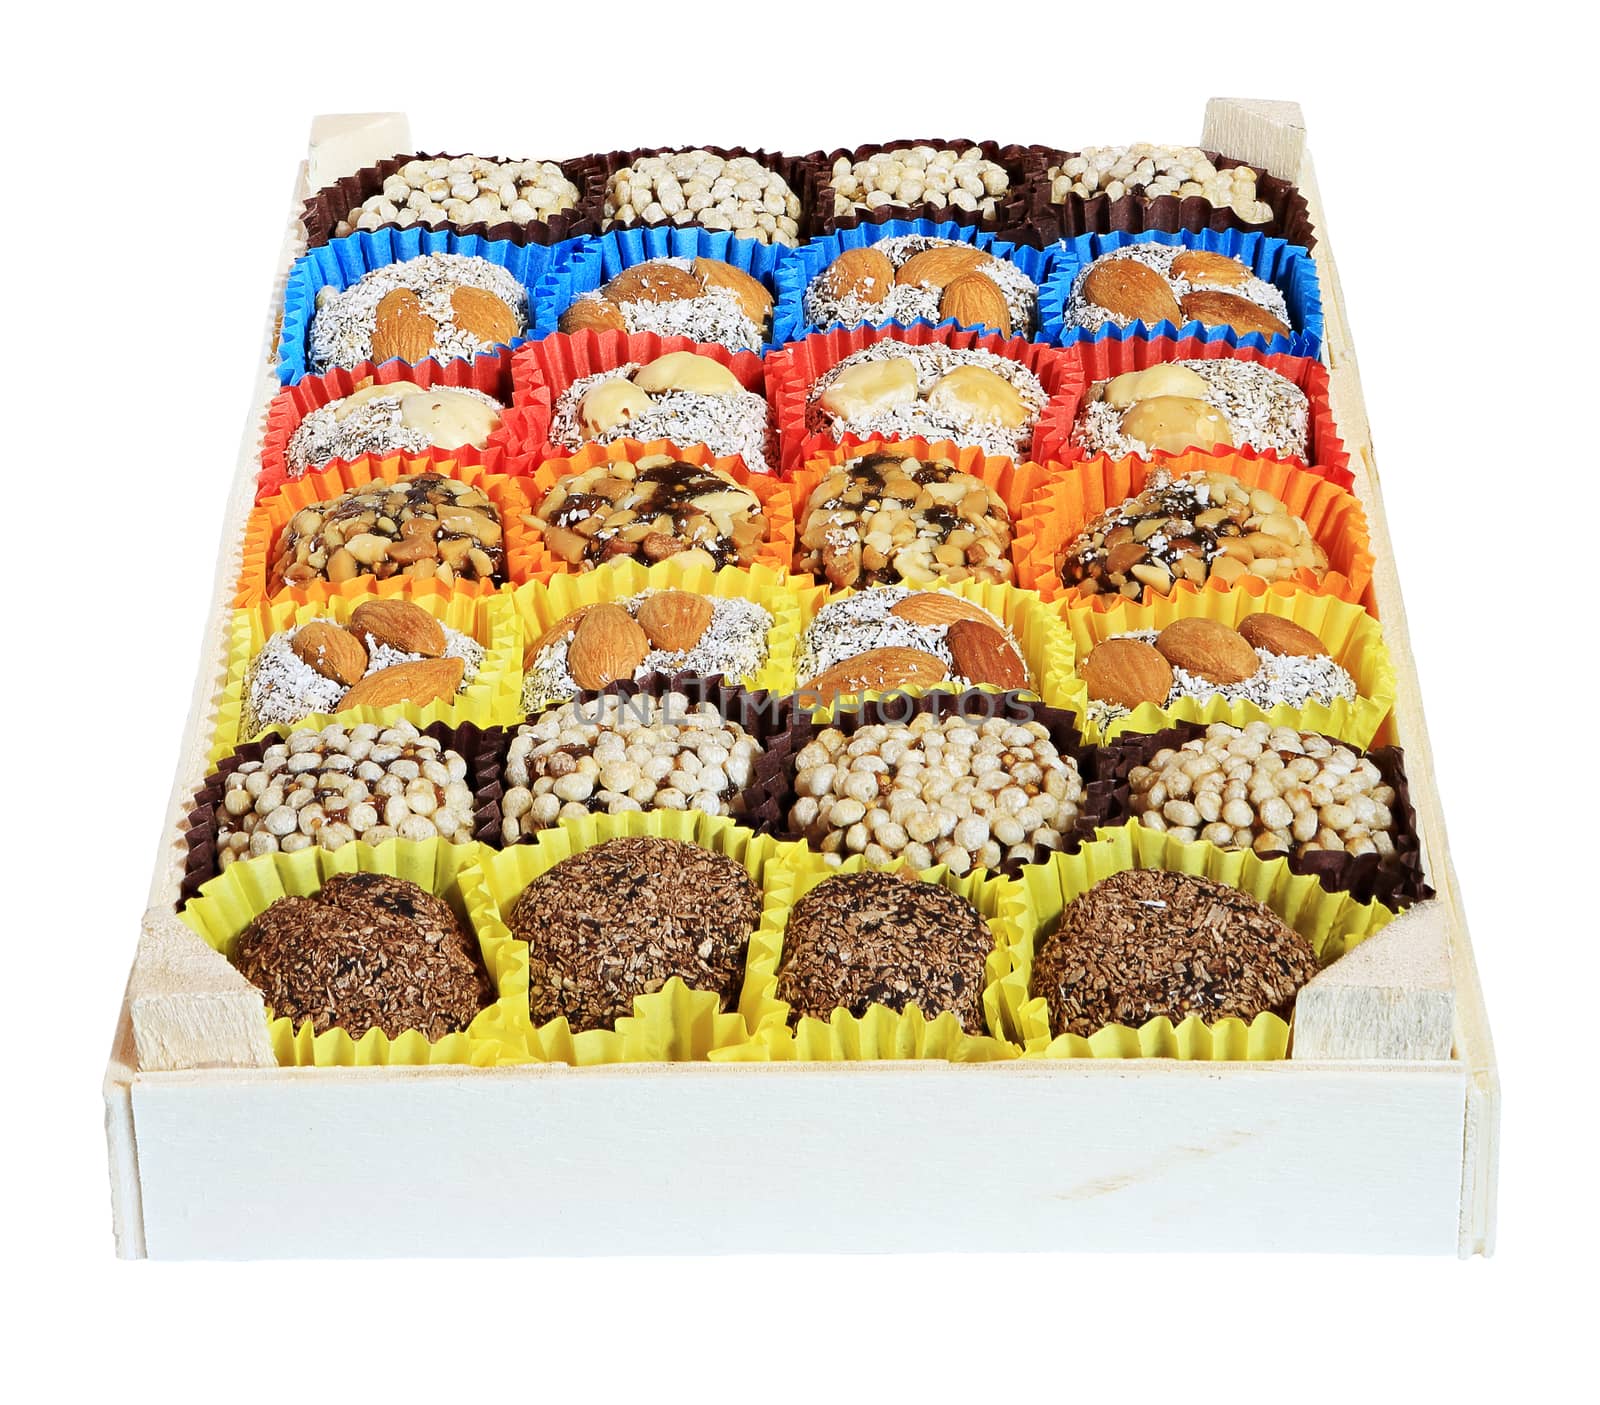 Turkish sweets, candies in a wooden box on the white background
